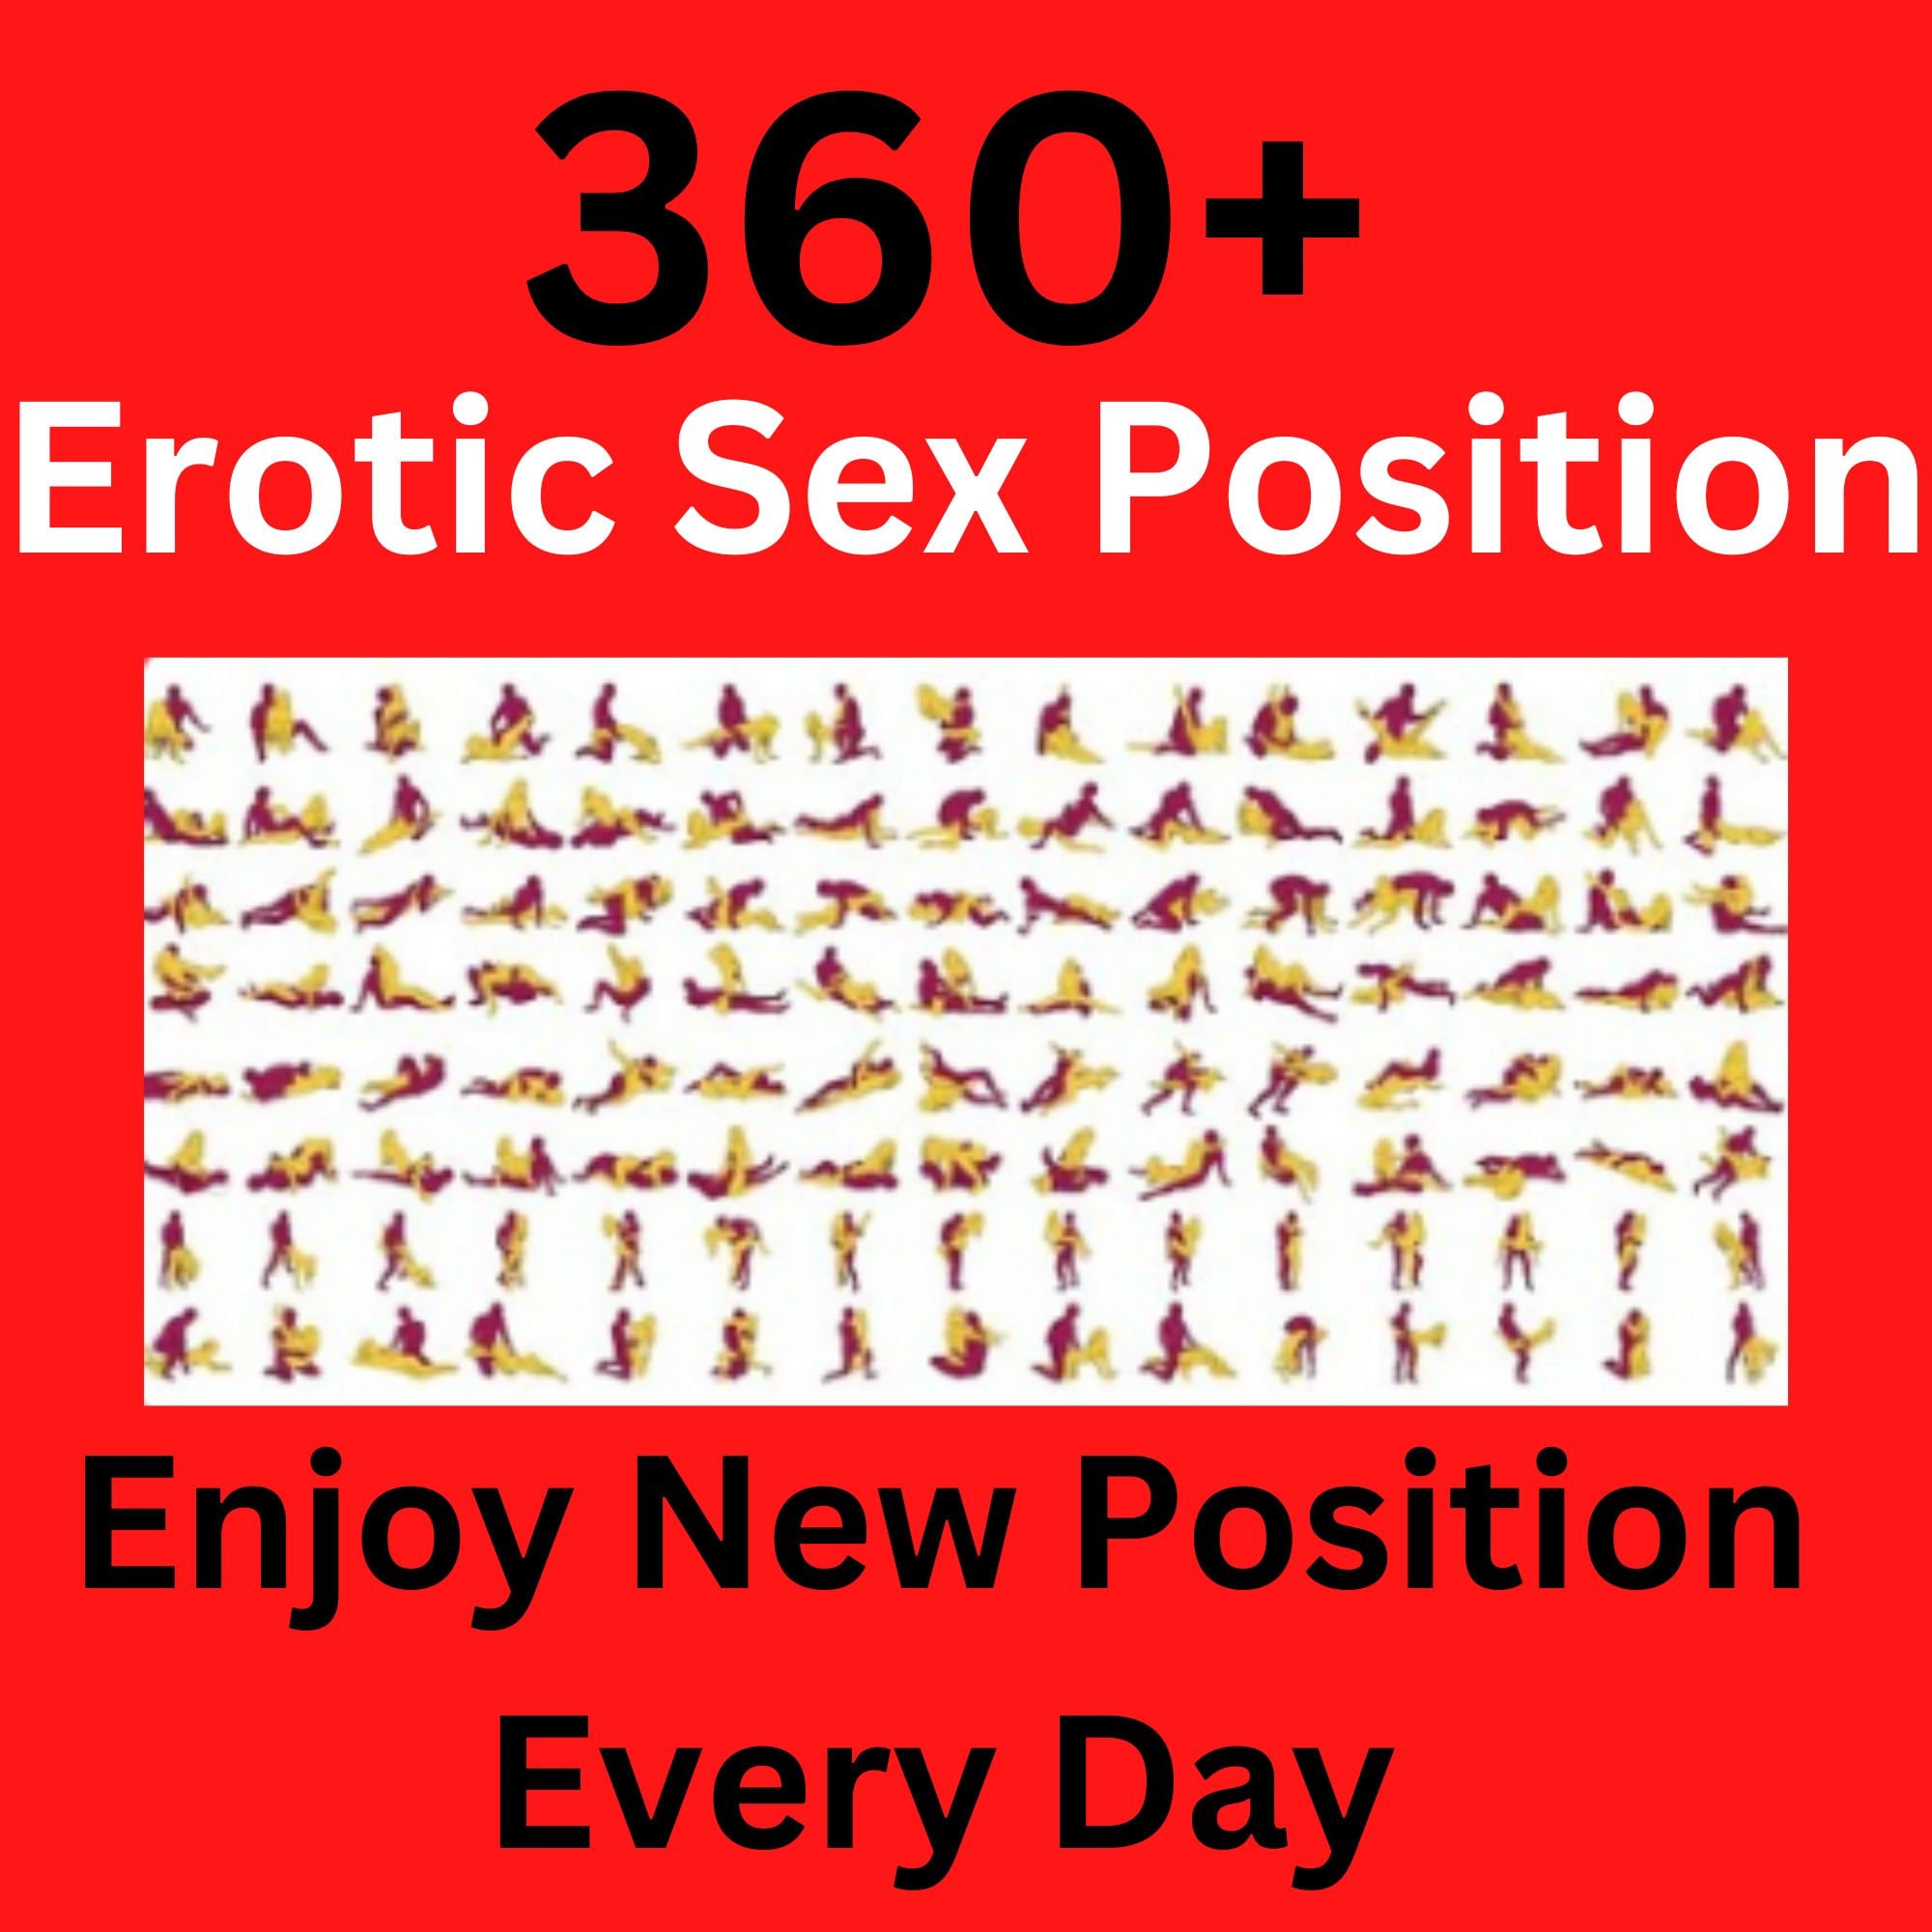 caleb mccall recommends all 365 sex positions pic